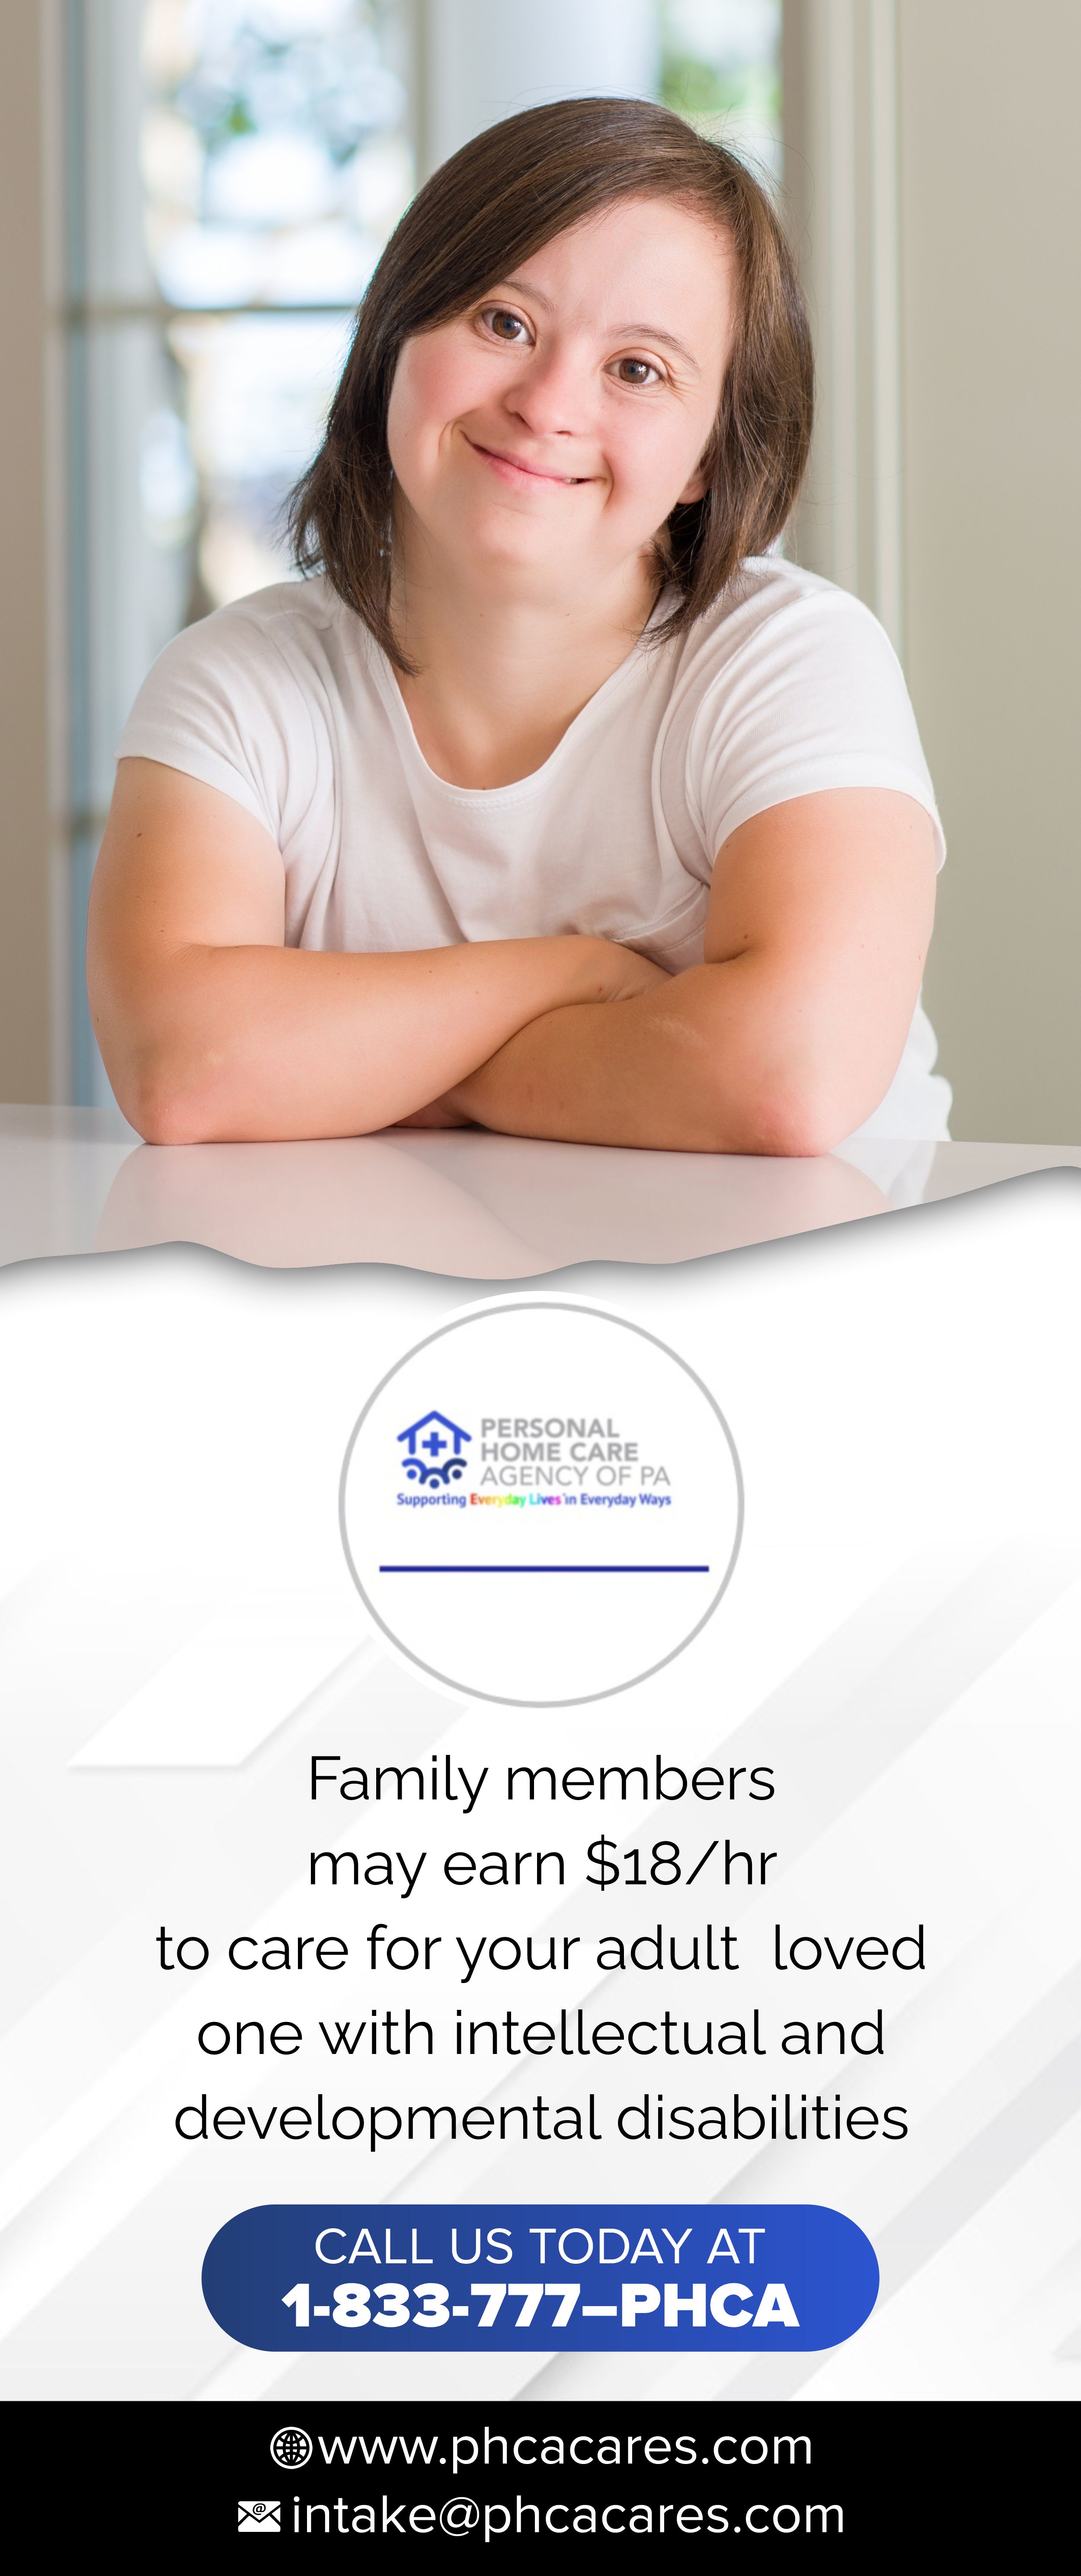 Family first Personal Home Care Agency of Pennsylvania Is Supporting Qualified Family Members To Provide IHCS To Their Loved Ones